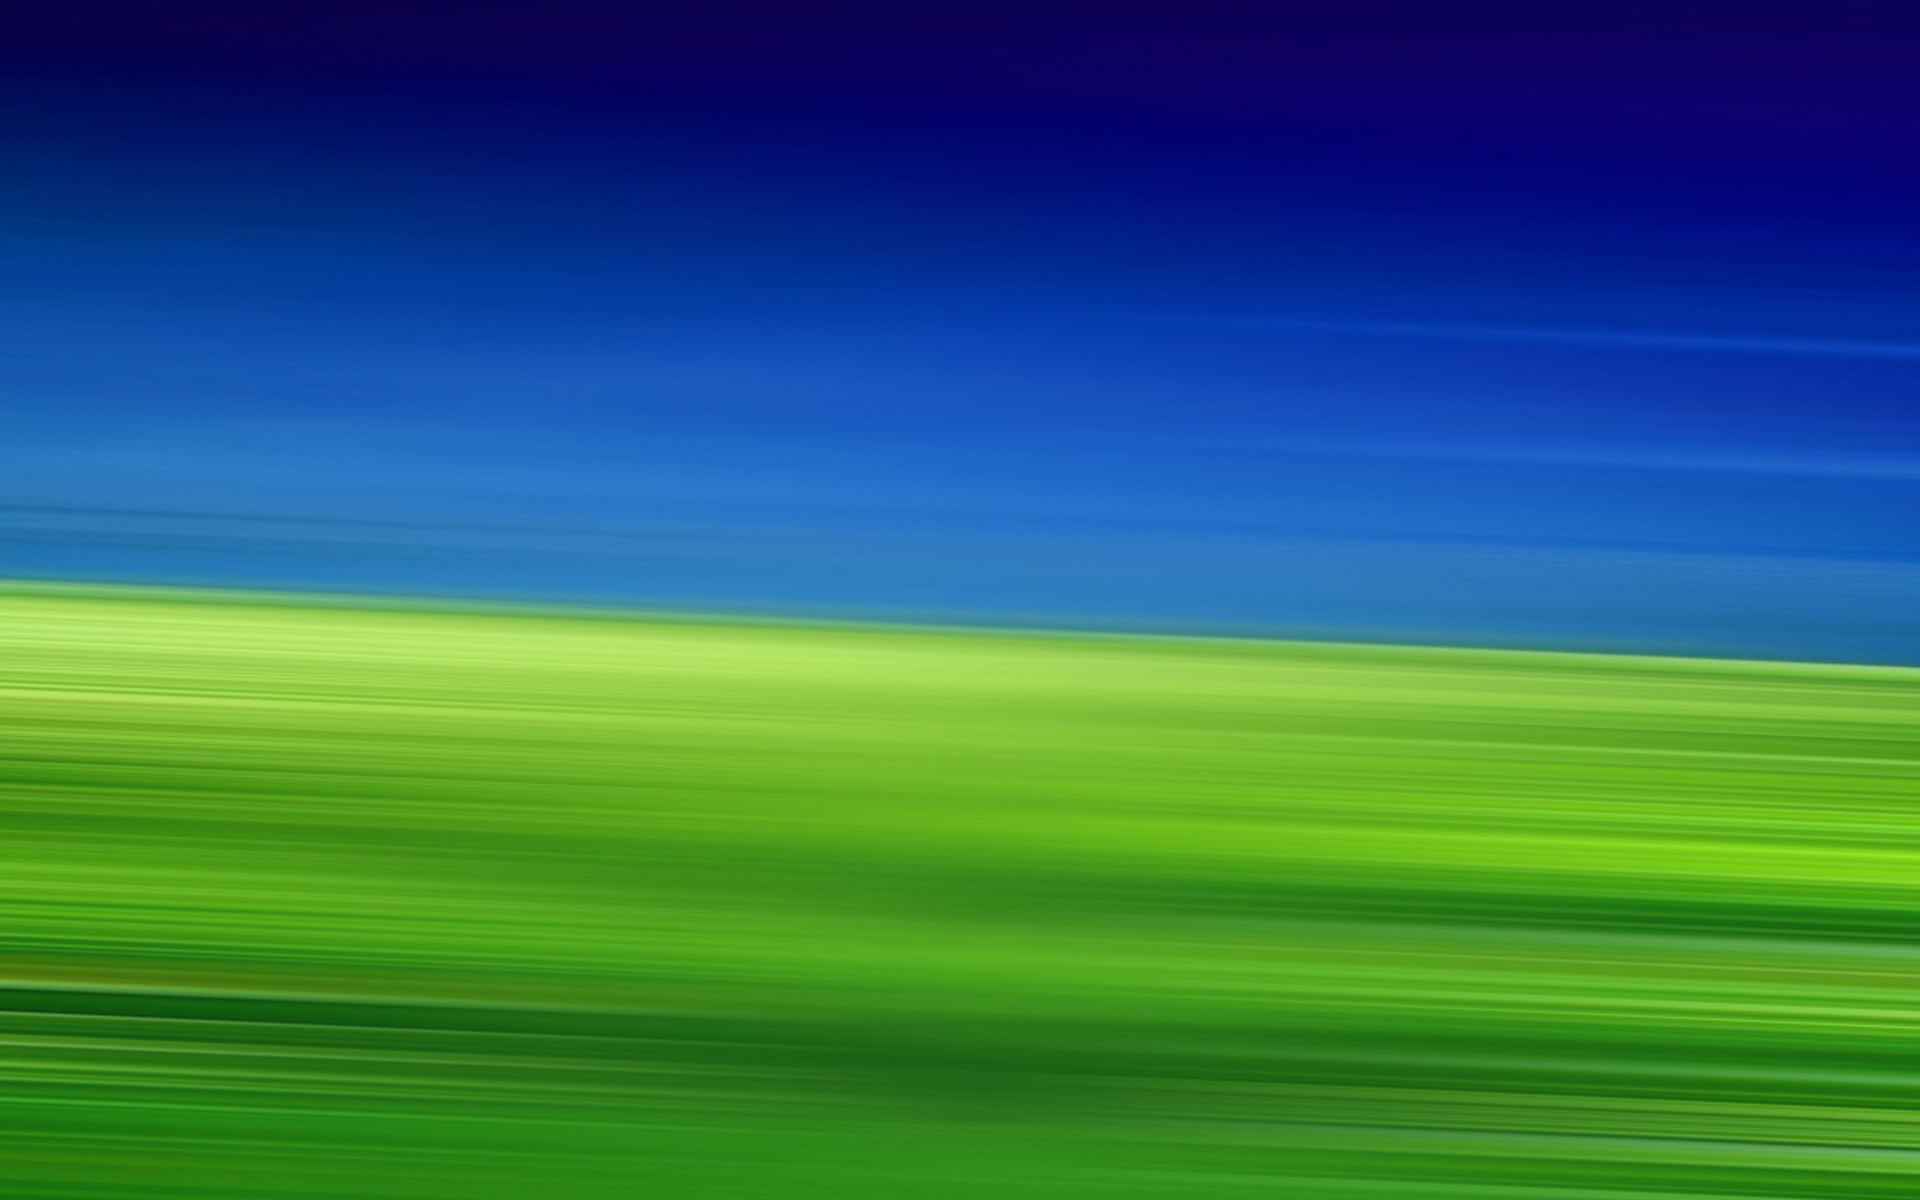 Blue and green wallpaper